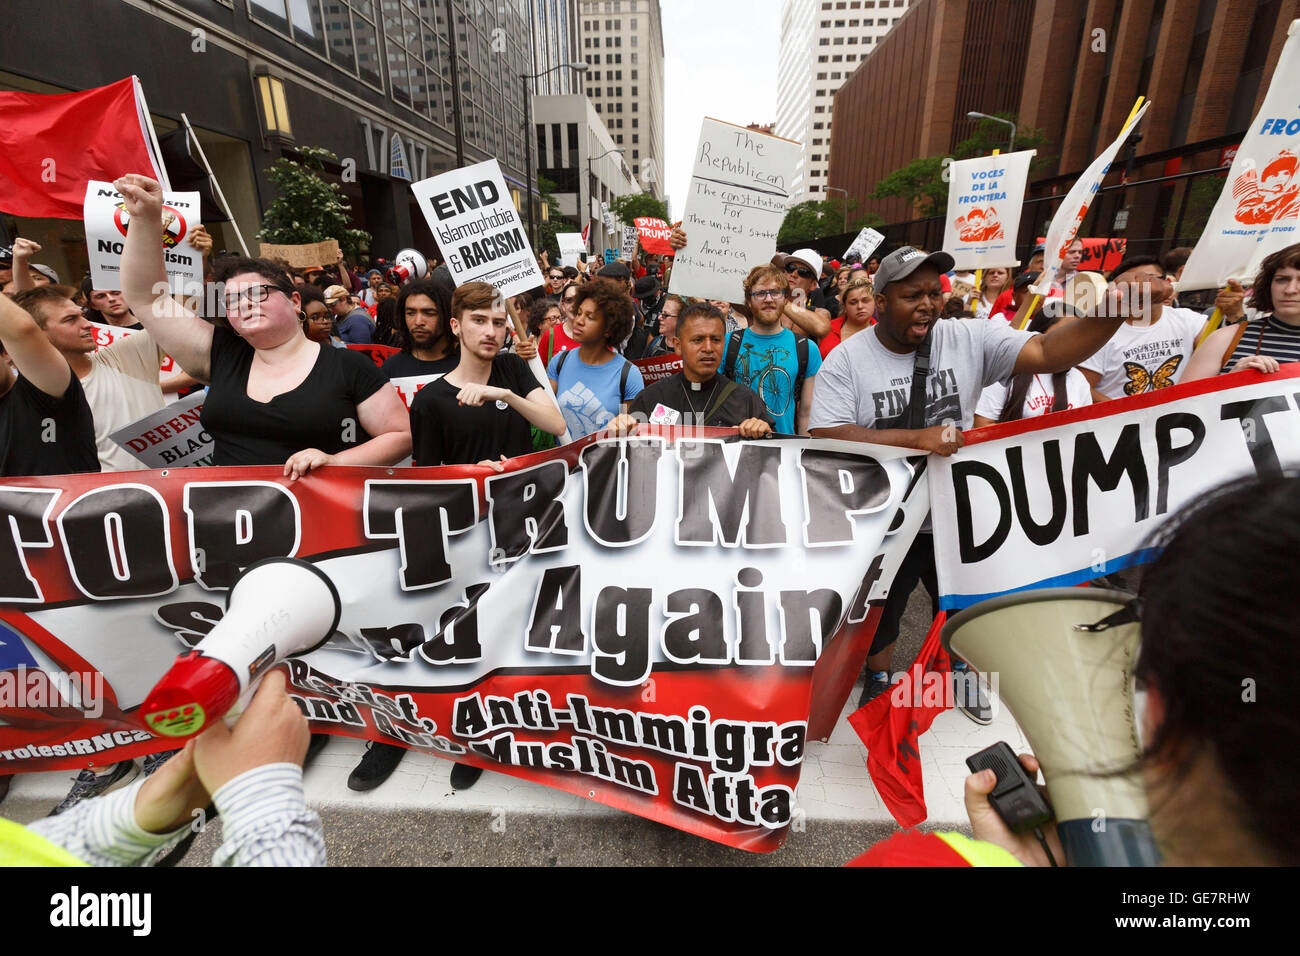 The Dump Trump rally marches through downtown Cleveland on July 18, 2016 outside the Republican National Convention. Stock Photo